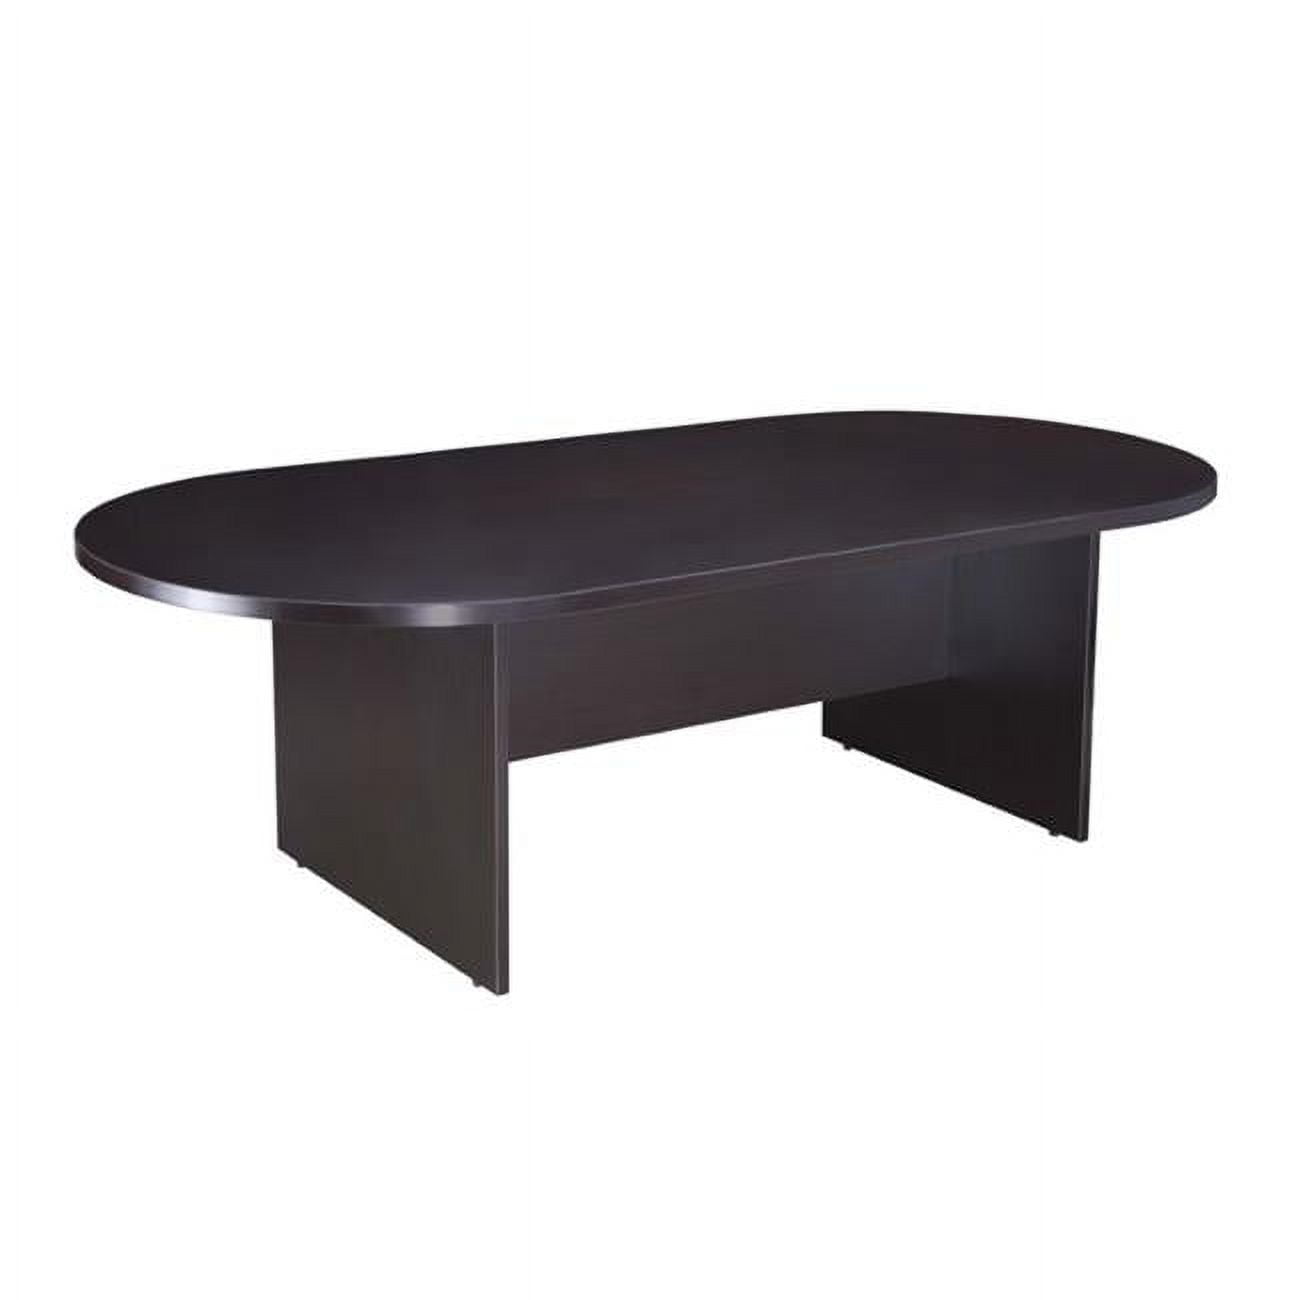 29.5 X 95 X 43 In. R - T Conference Table, Mocha